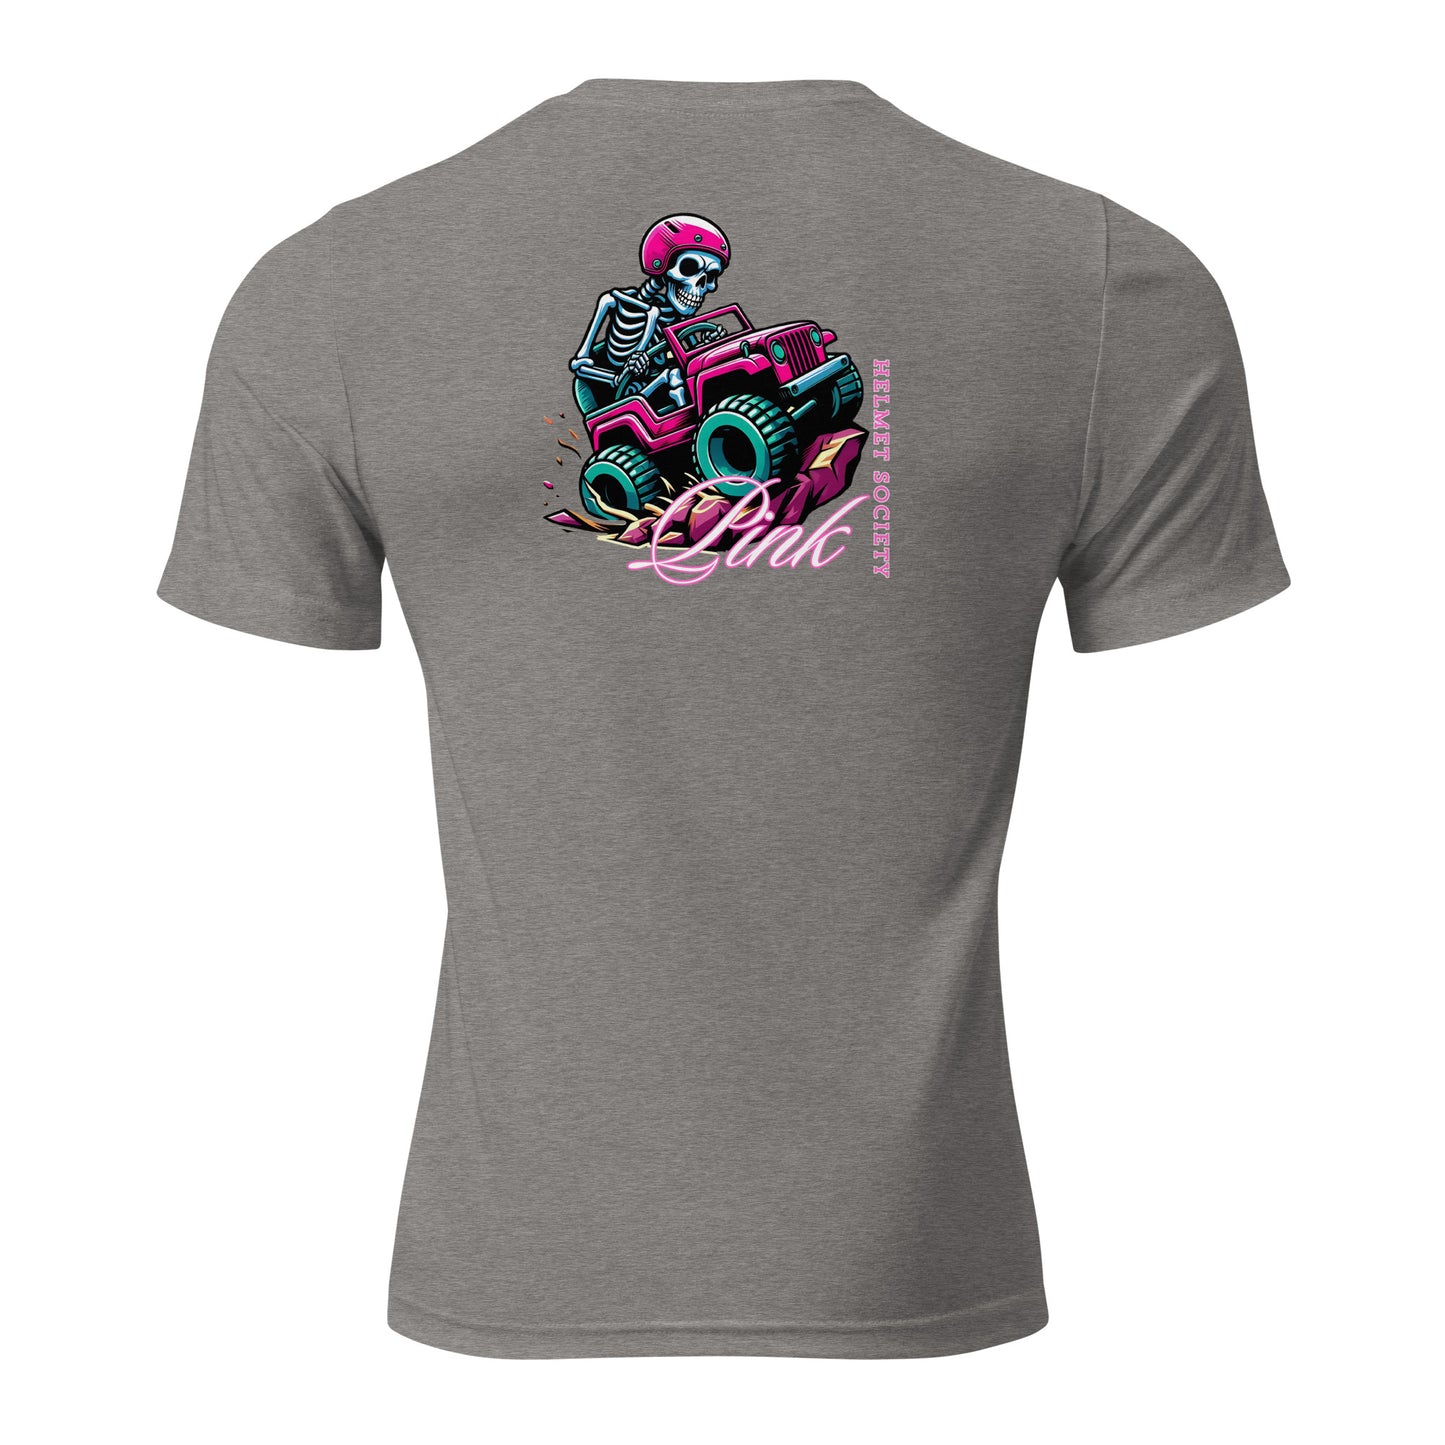 a grey shirt with a skeleton riding a pink car